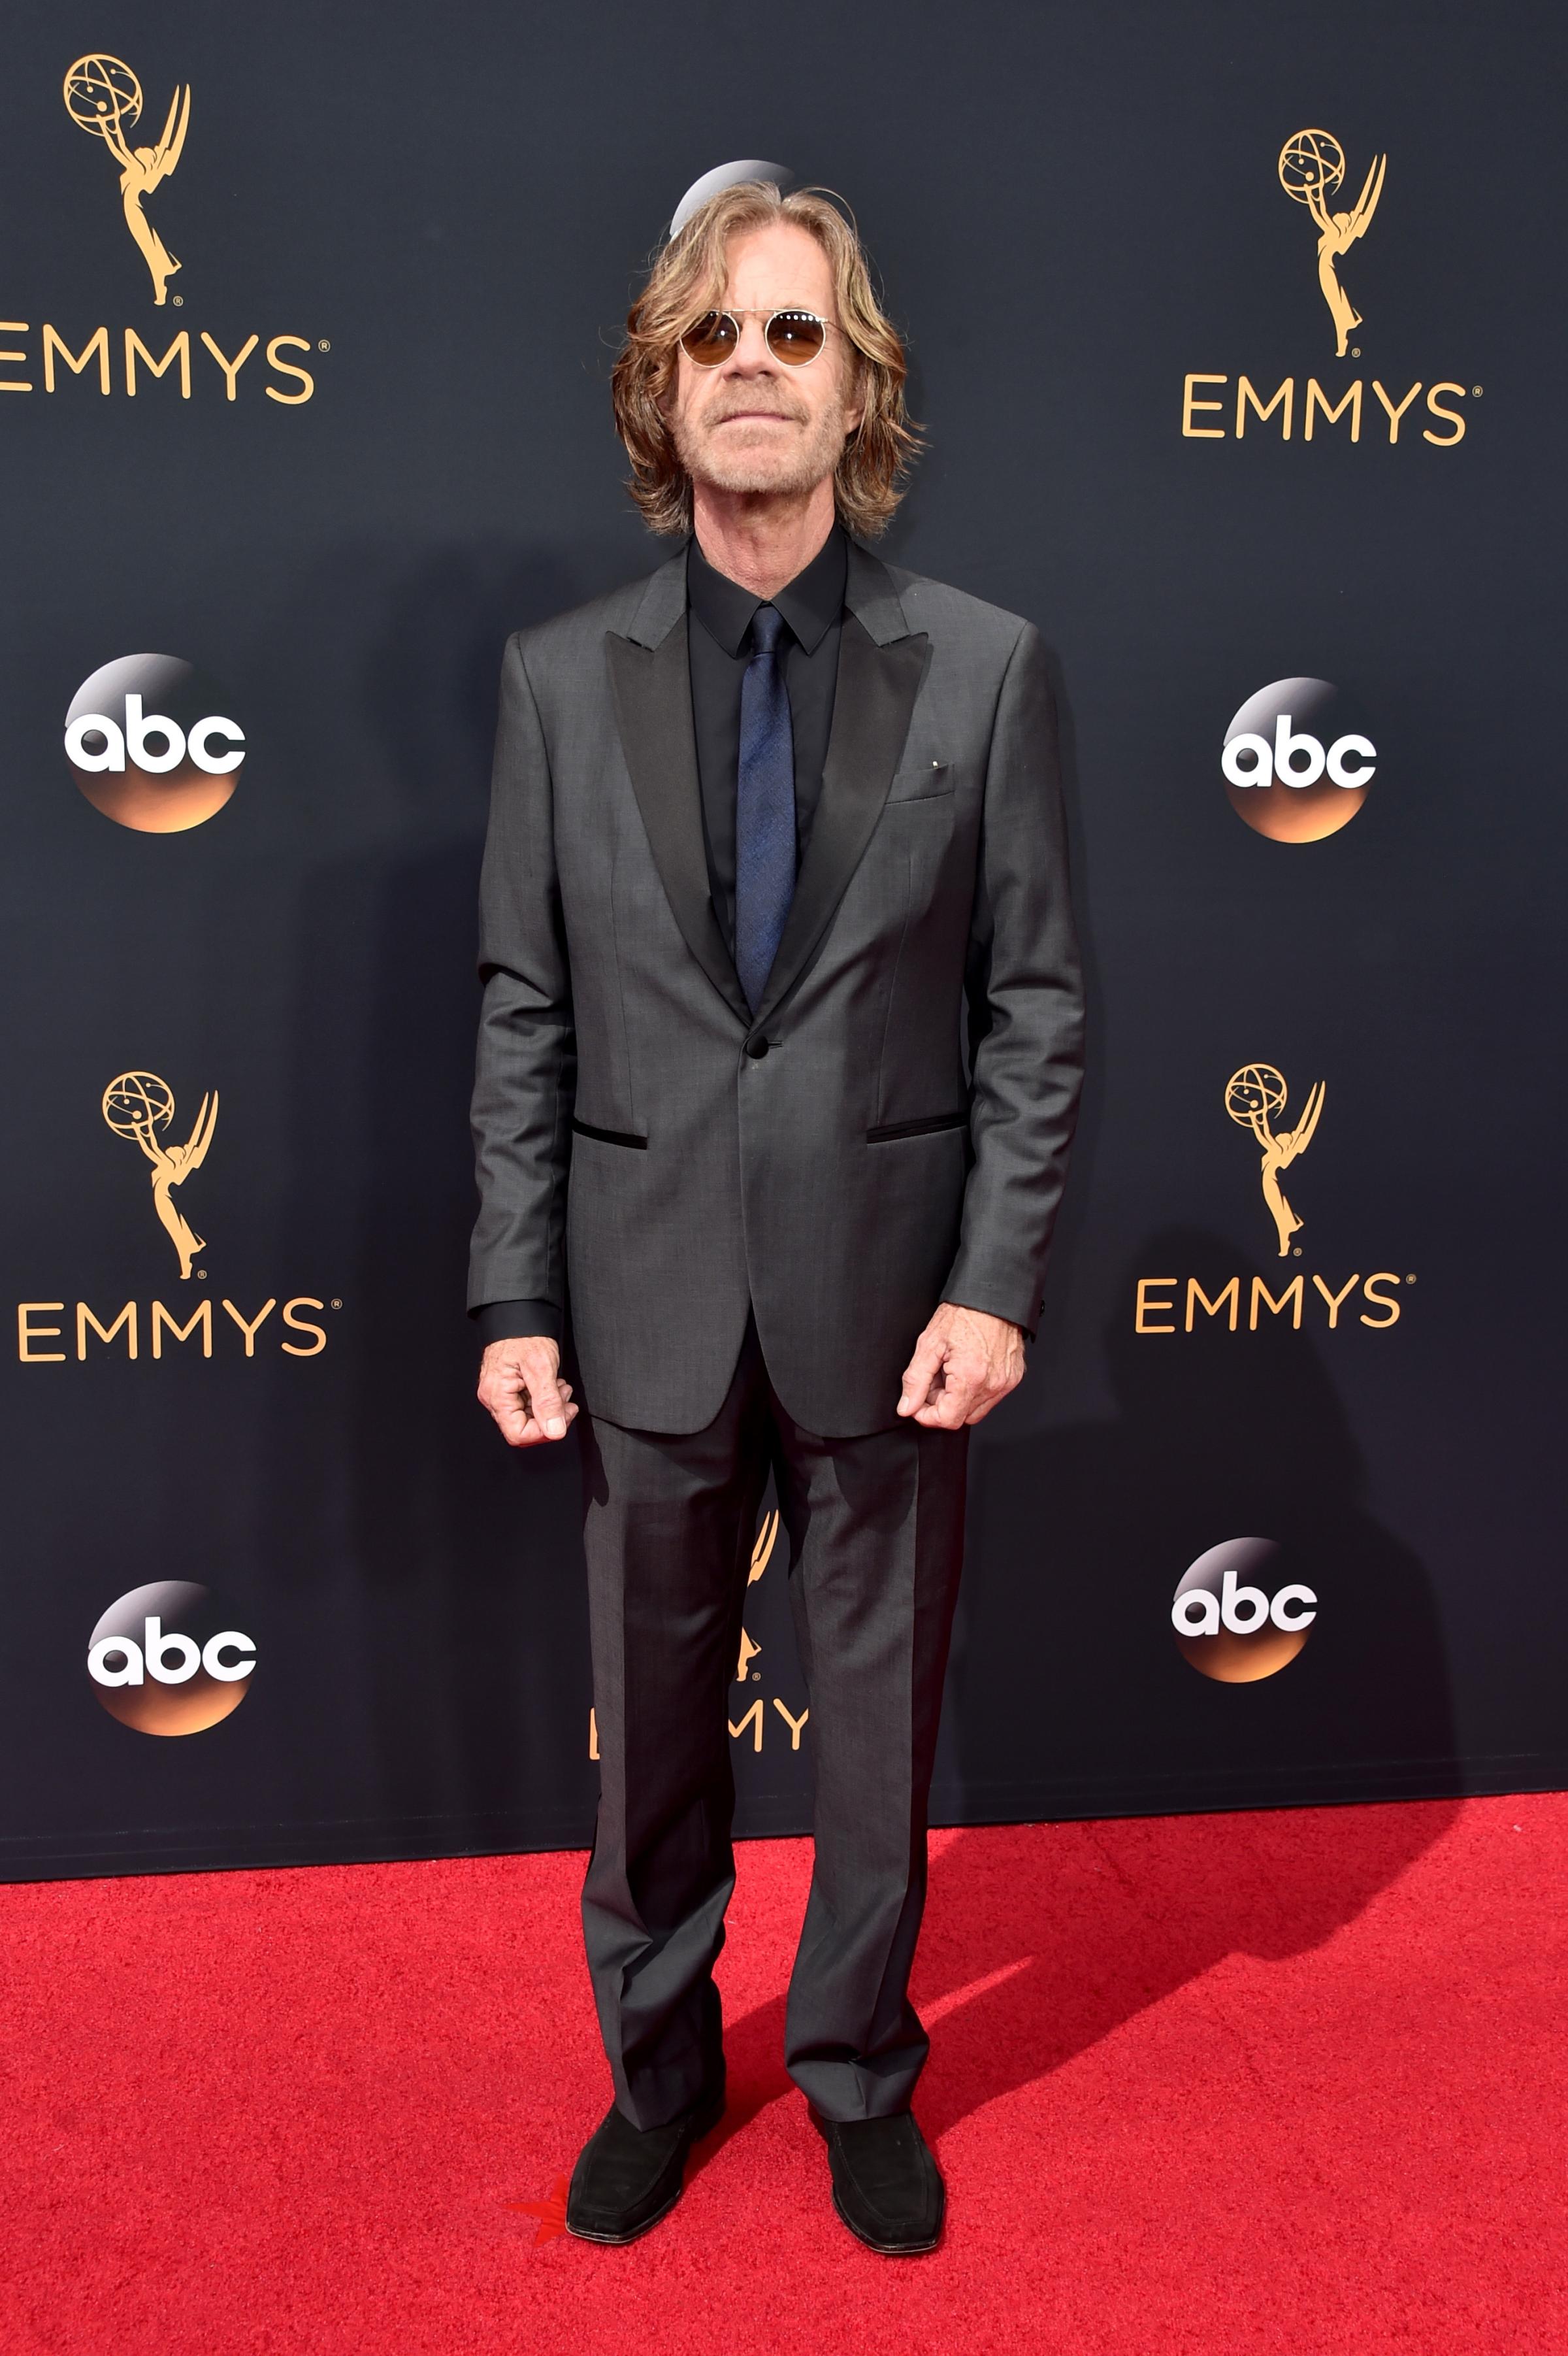 William H. Macy arrives at the 68th Annual Primetime Emmy Awards at Microsoft Theater on September 18, 2016 in Los Angeles.